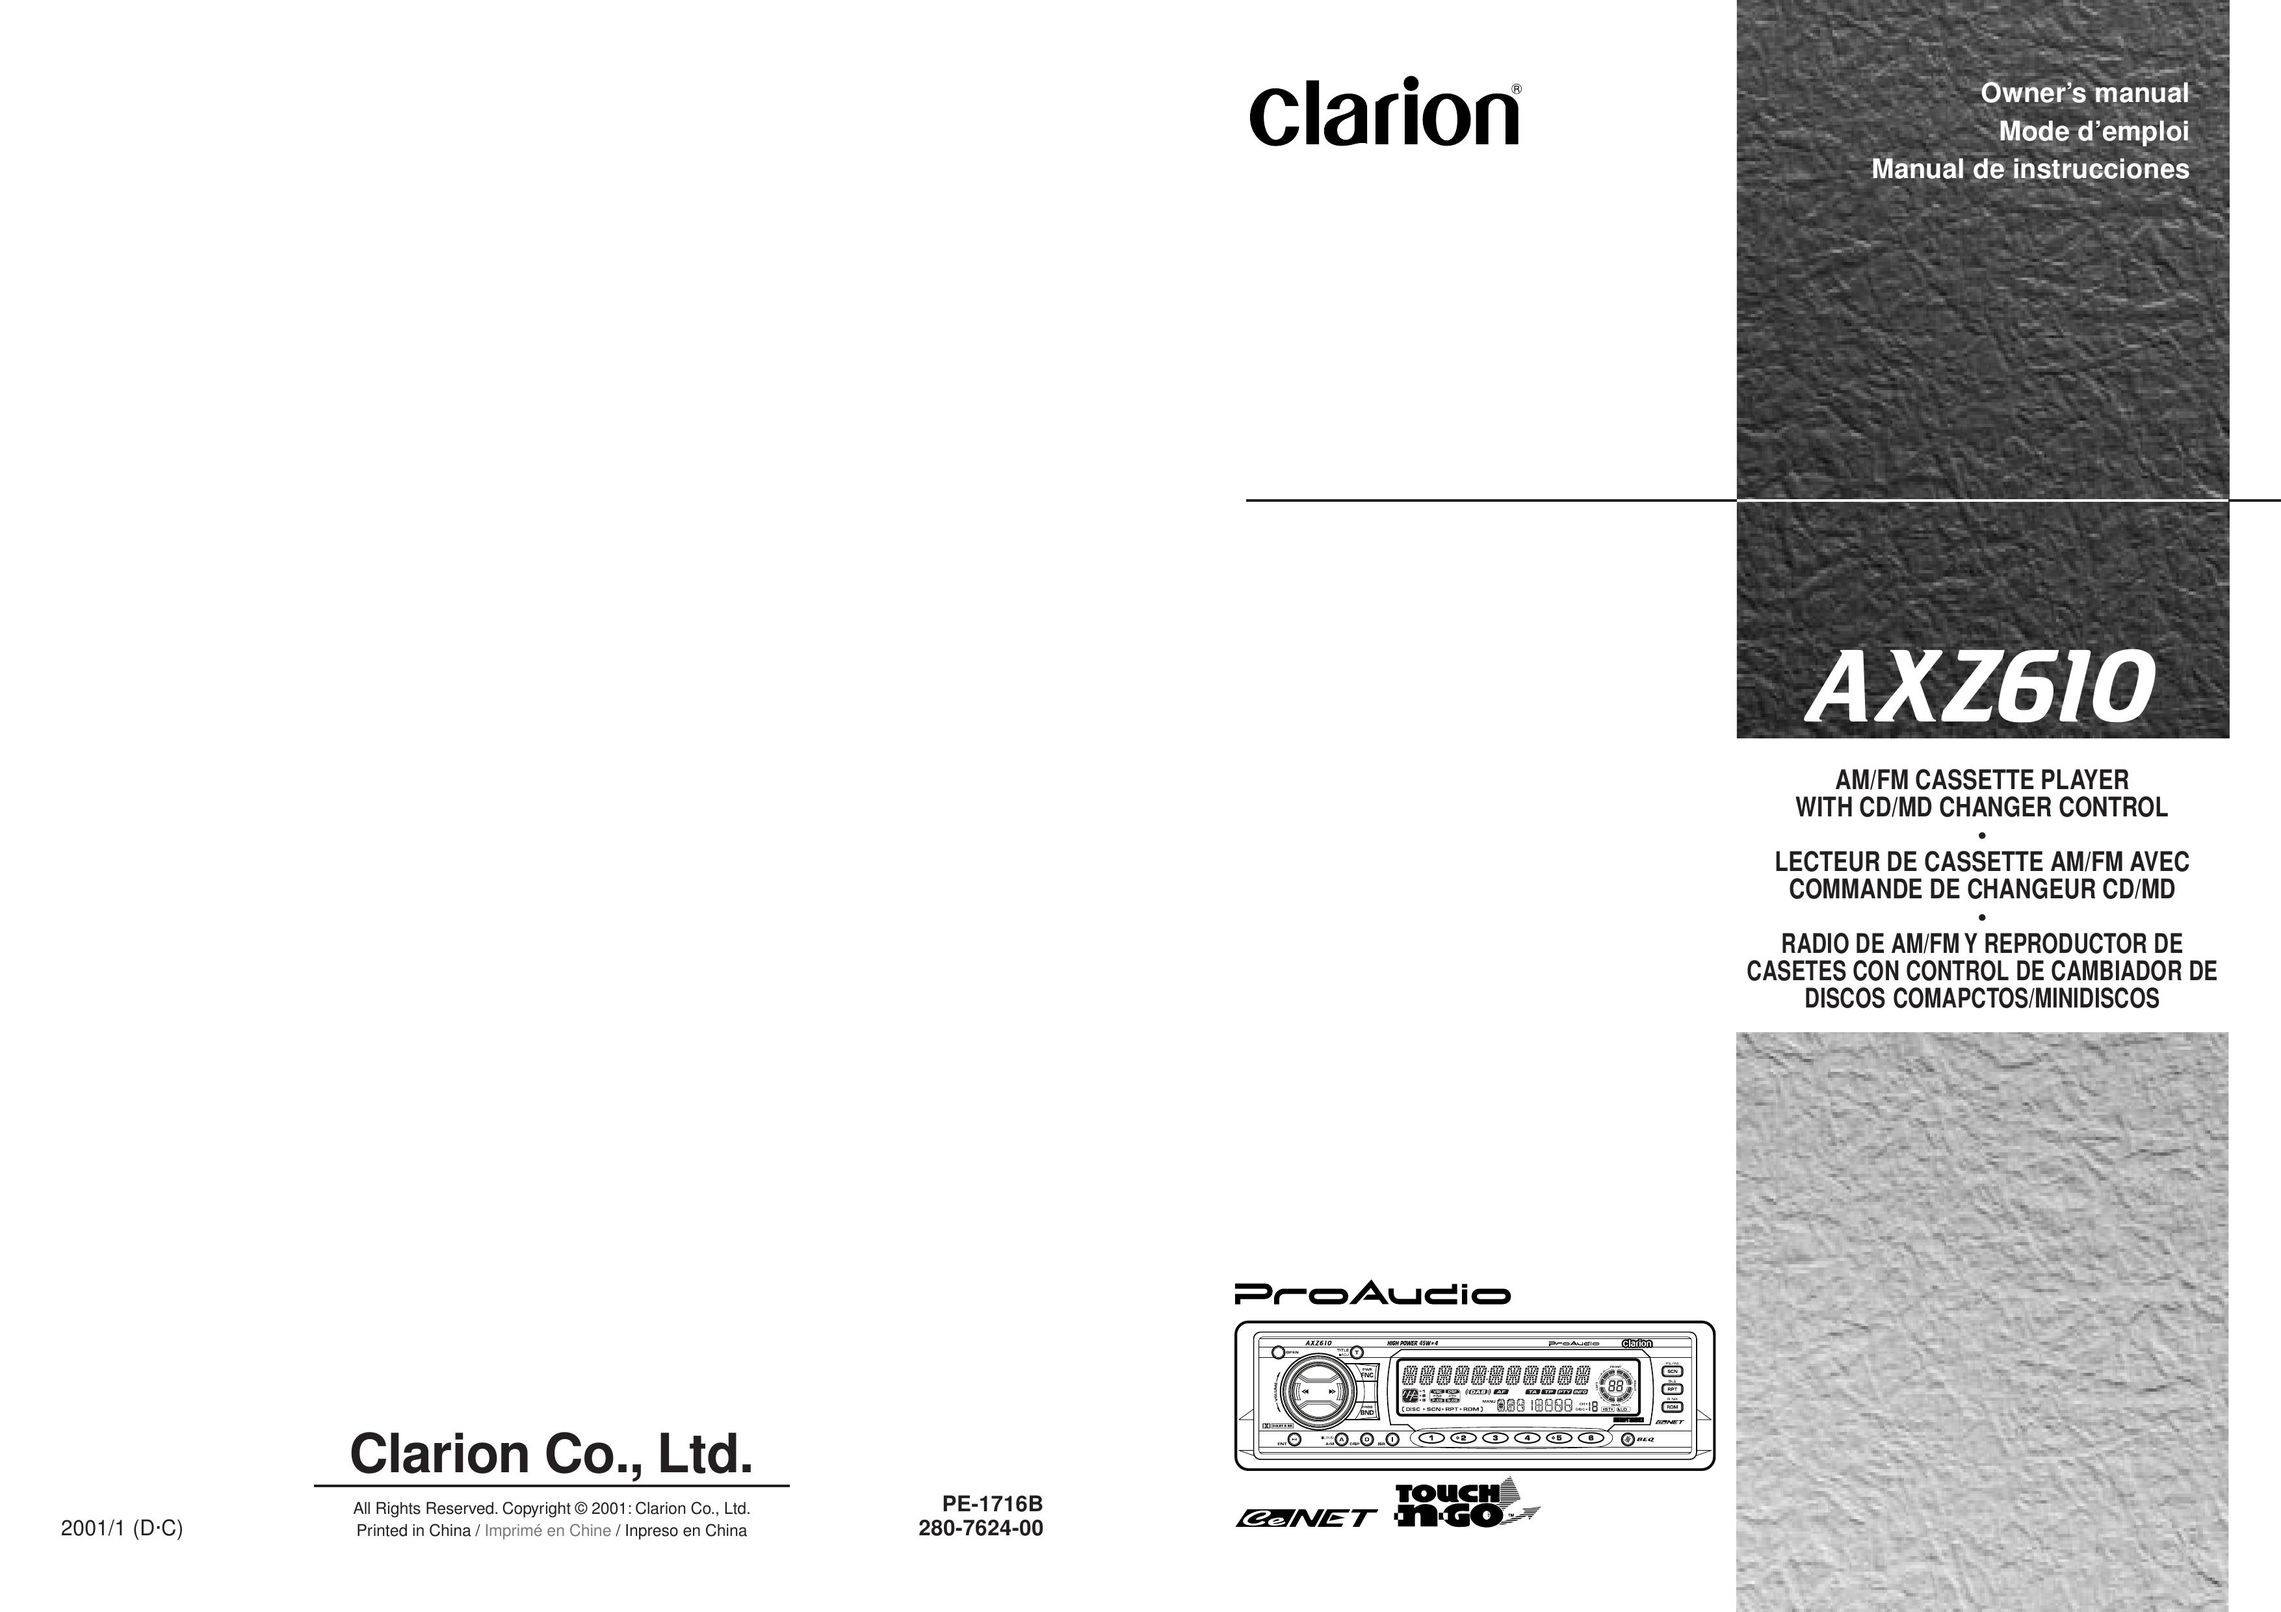 Clarion AXZ610 Cassette Player User Manual